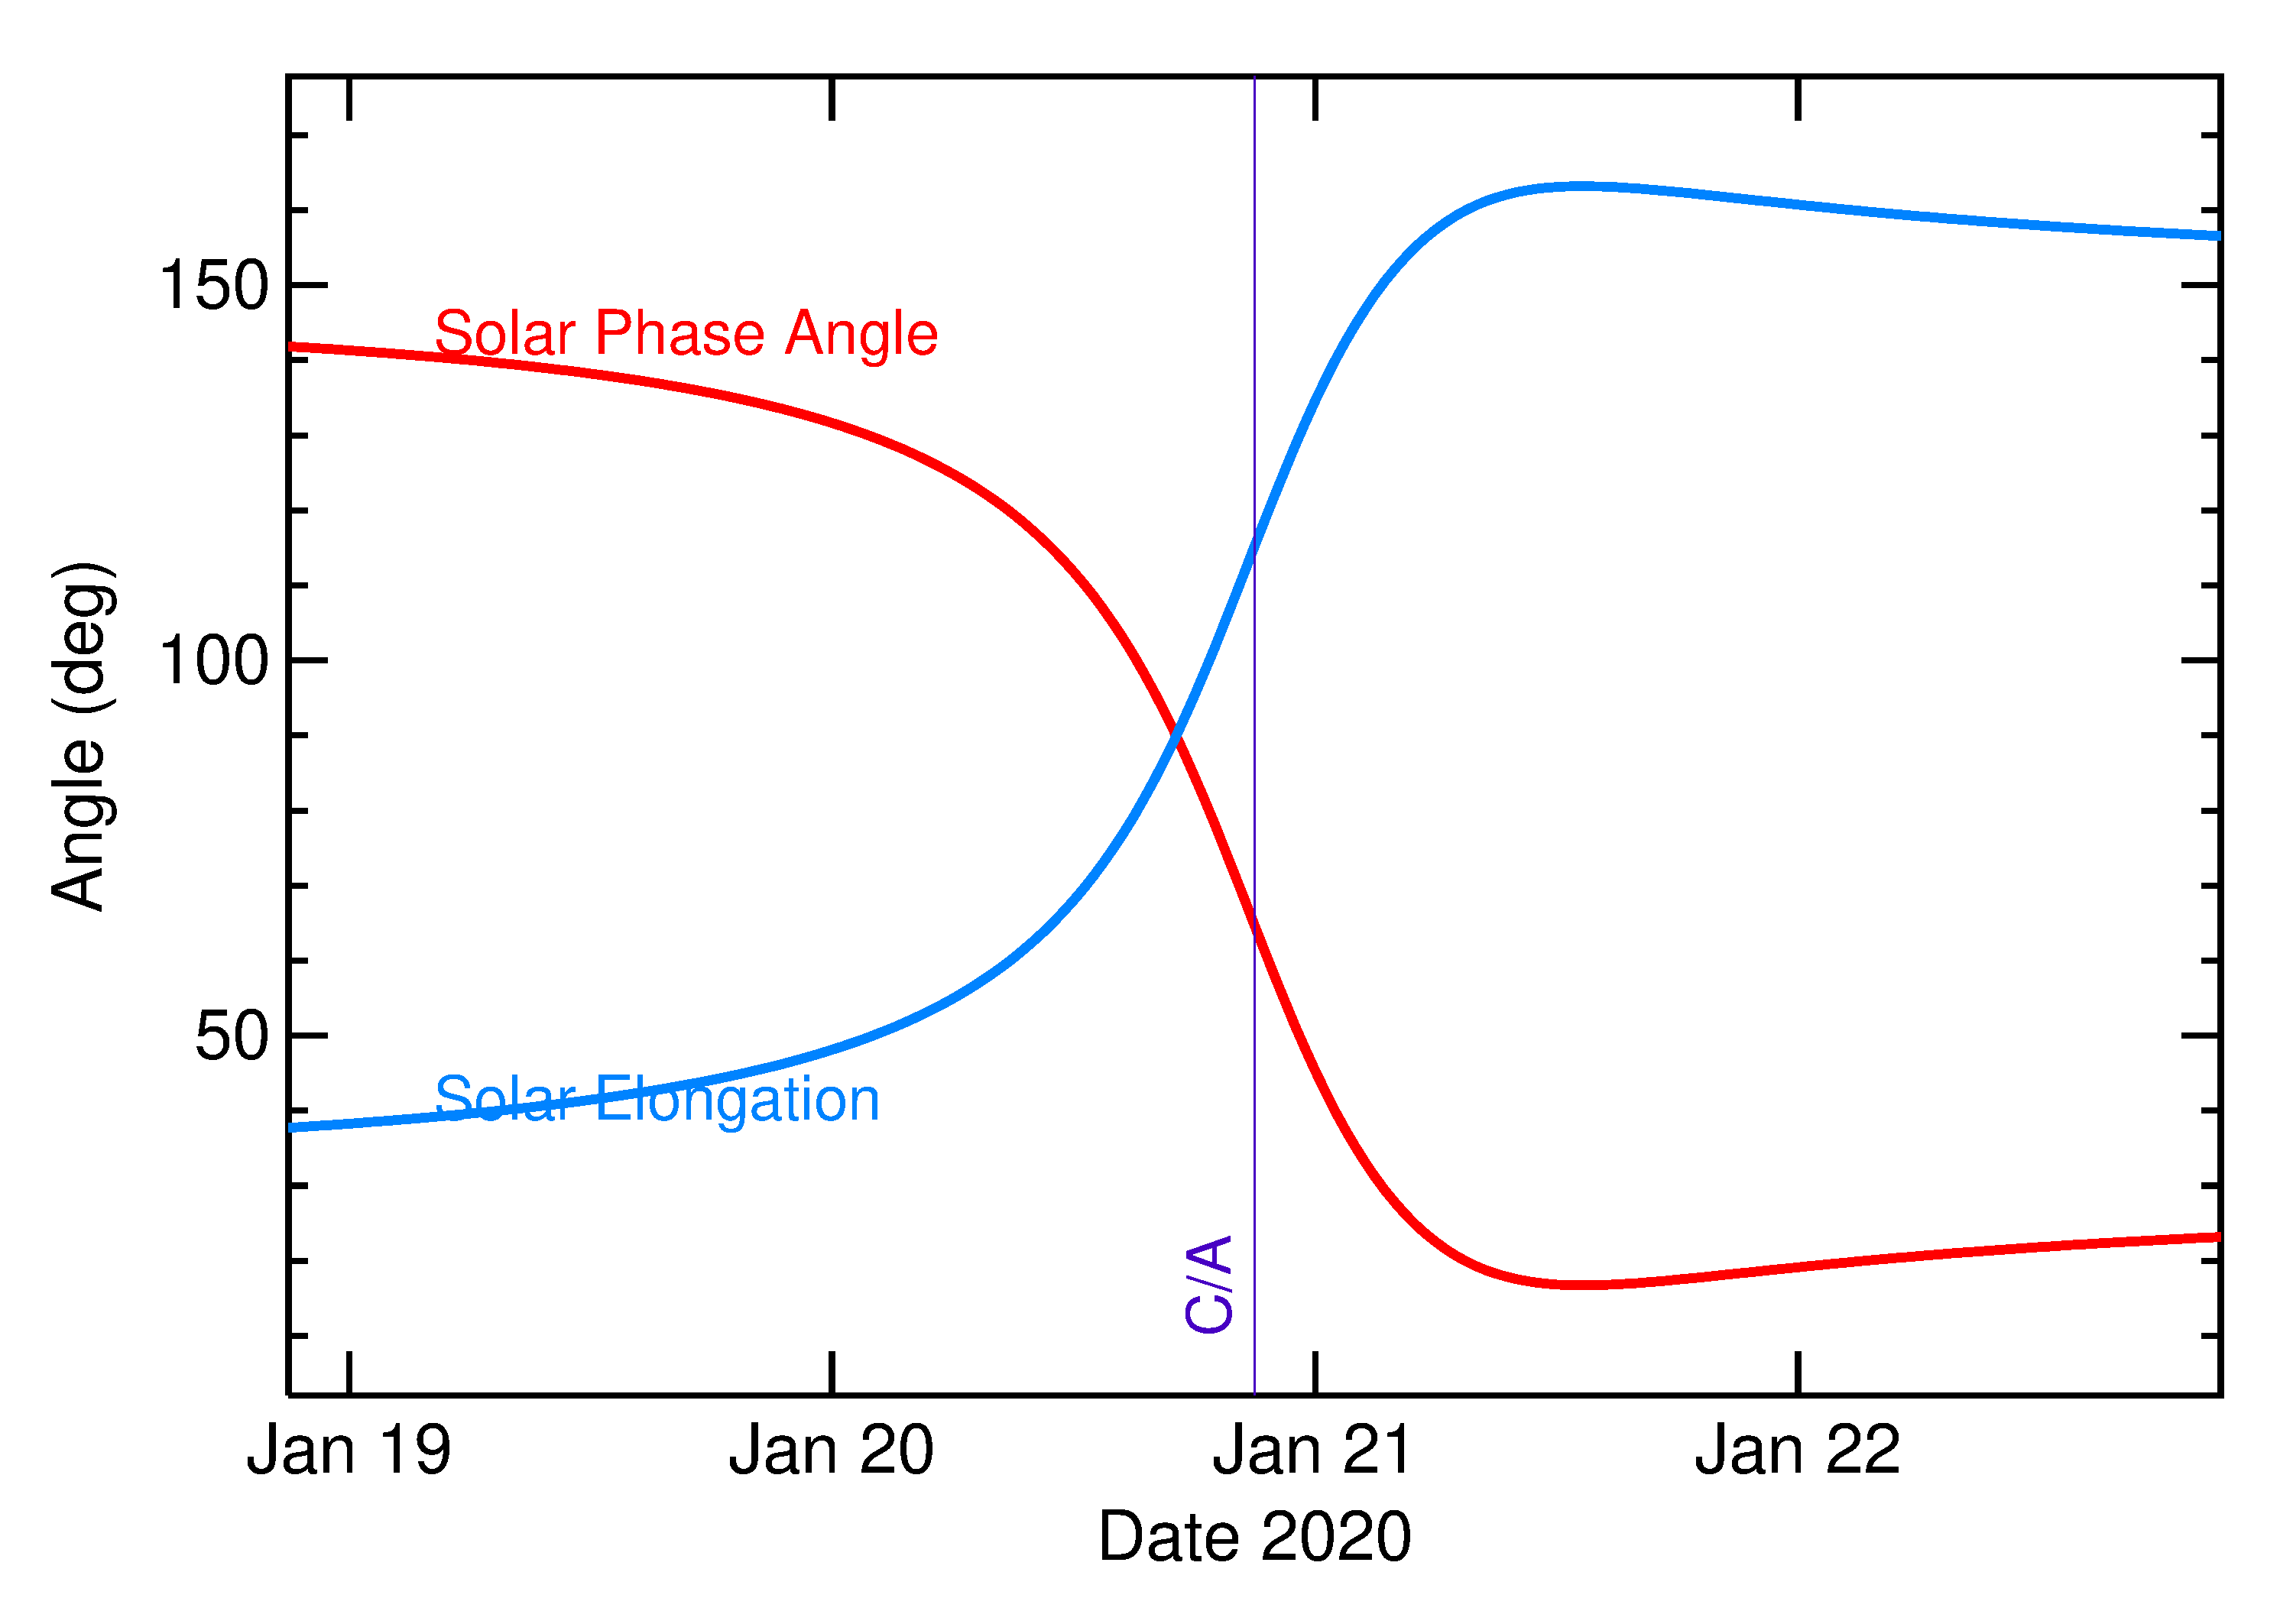 Solar Elongation and Solar Phase Angle of 2020 BK3 in the days around closest approach